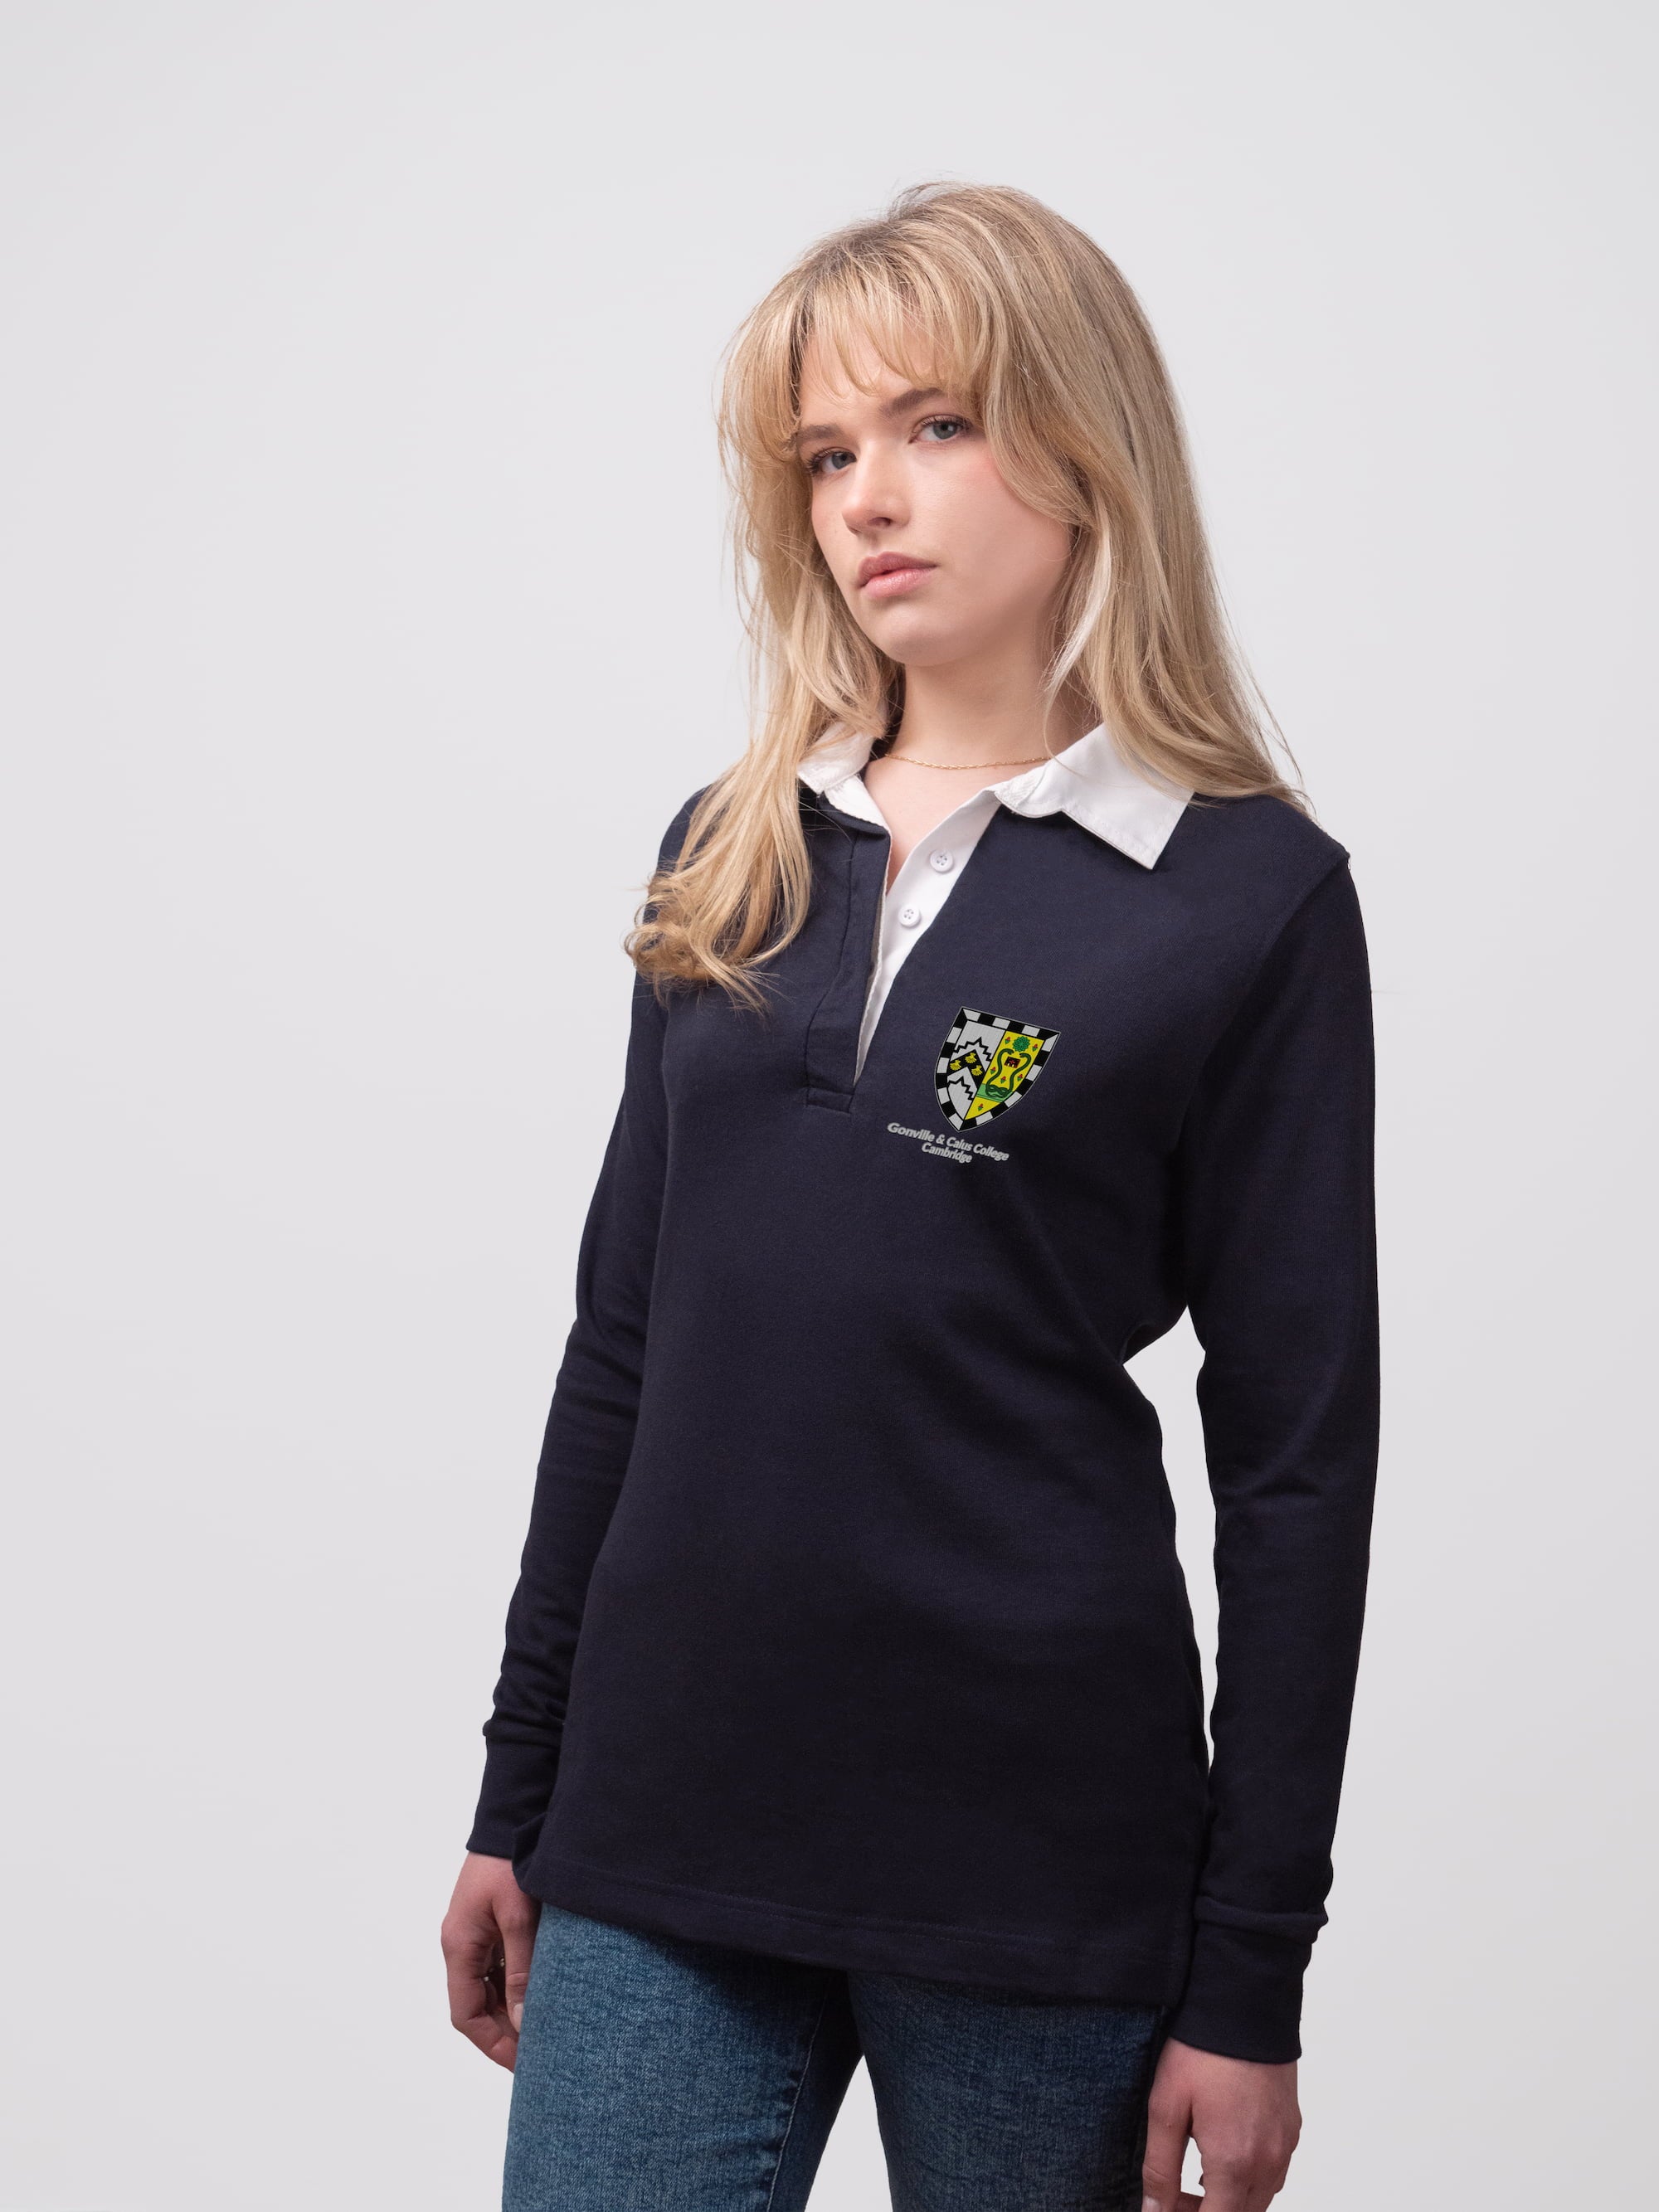 Student wearing a navy Gonville & Caius College rugby shirt with embroidered crest